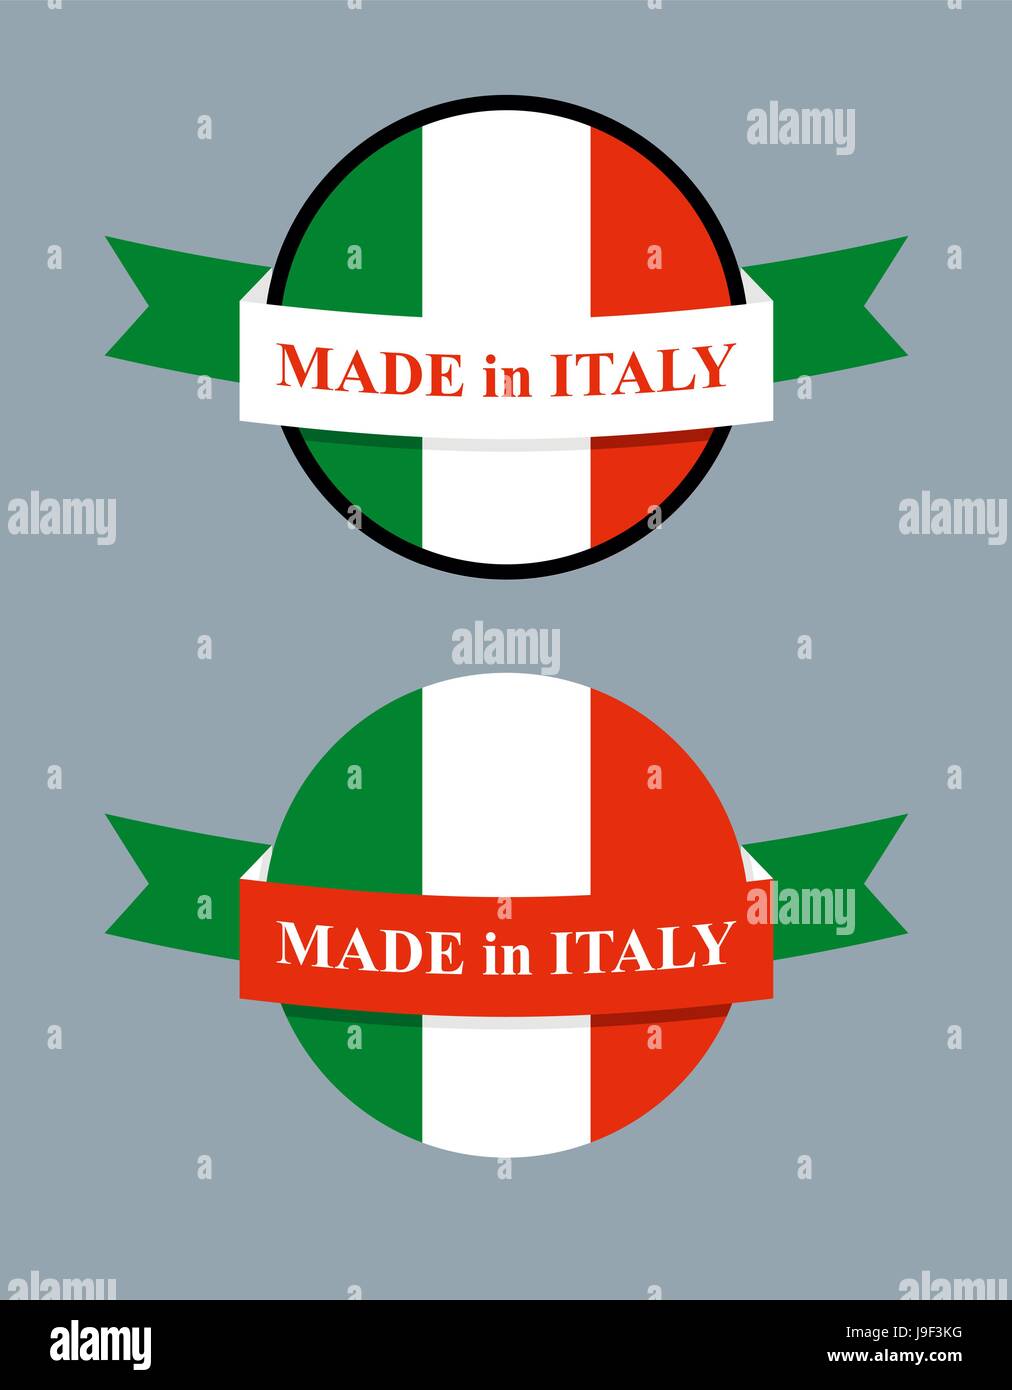 Made in Italy product logo. Map of Italy and Ribbon with colors of Italian flag. Label template for production. Stock Vector